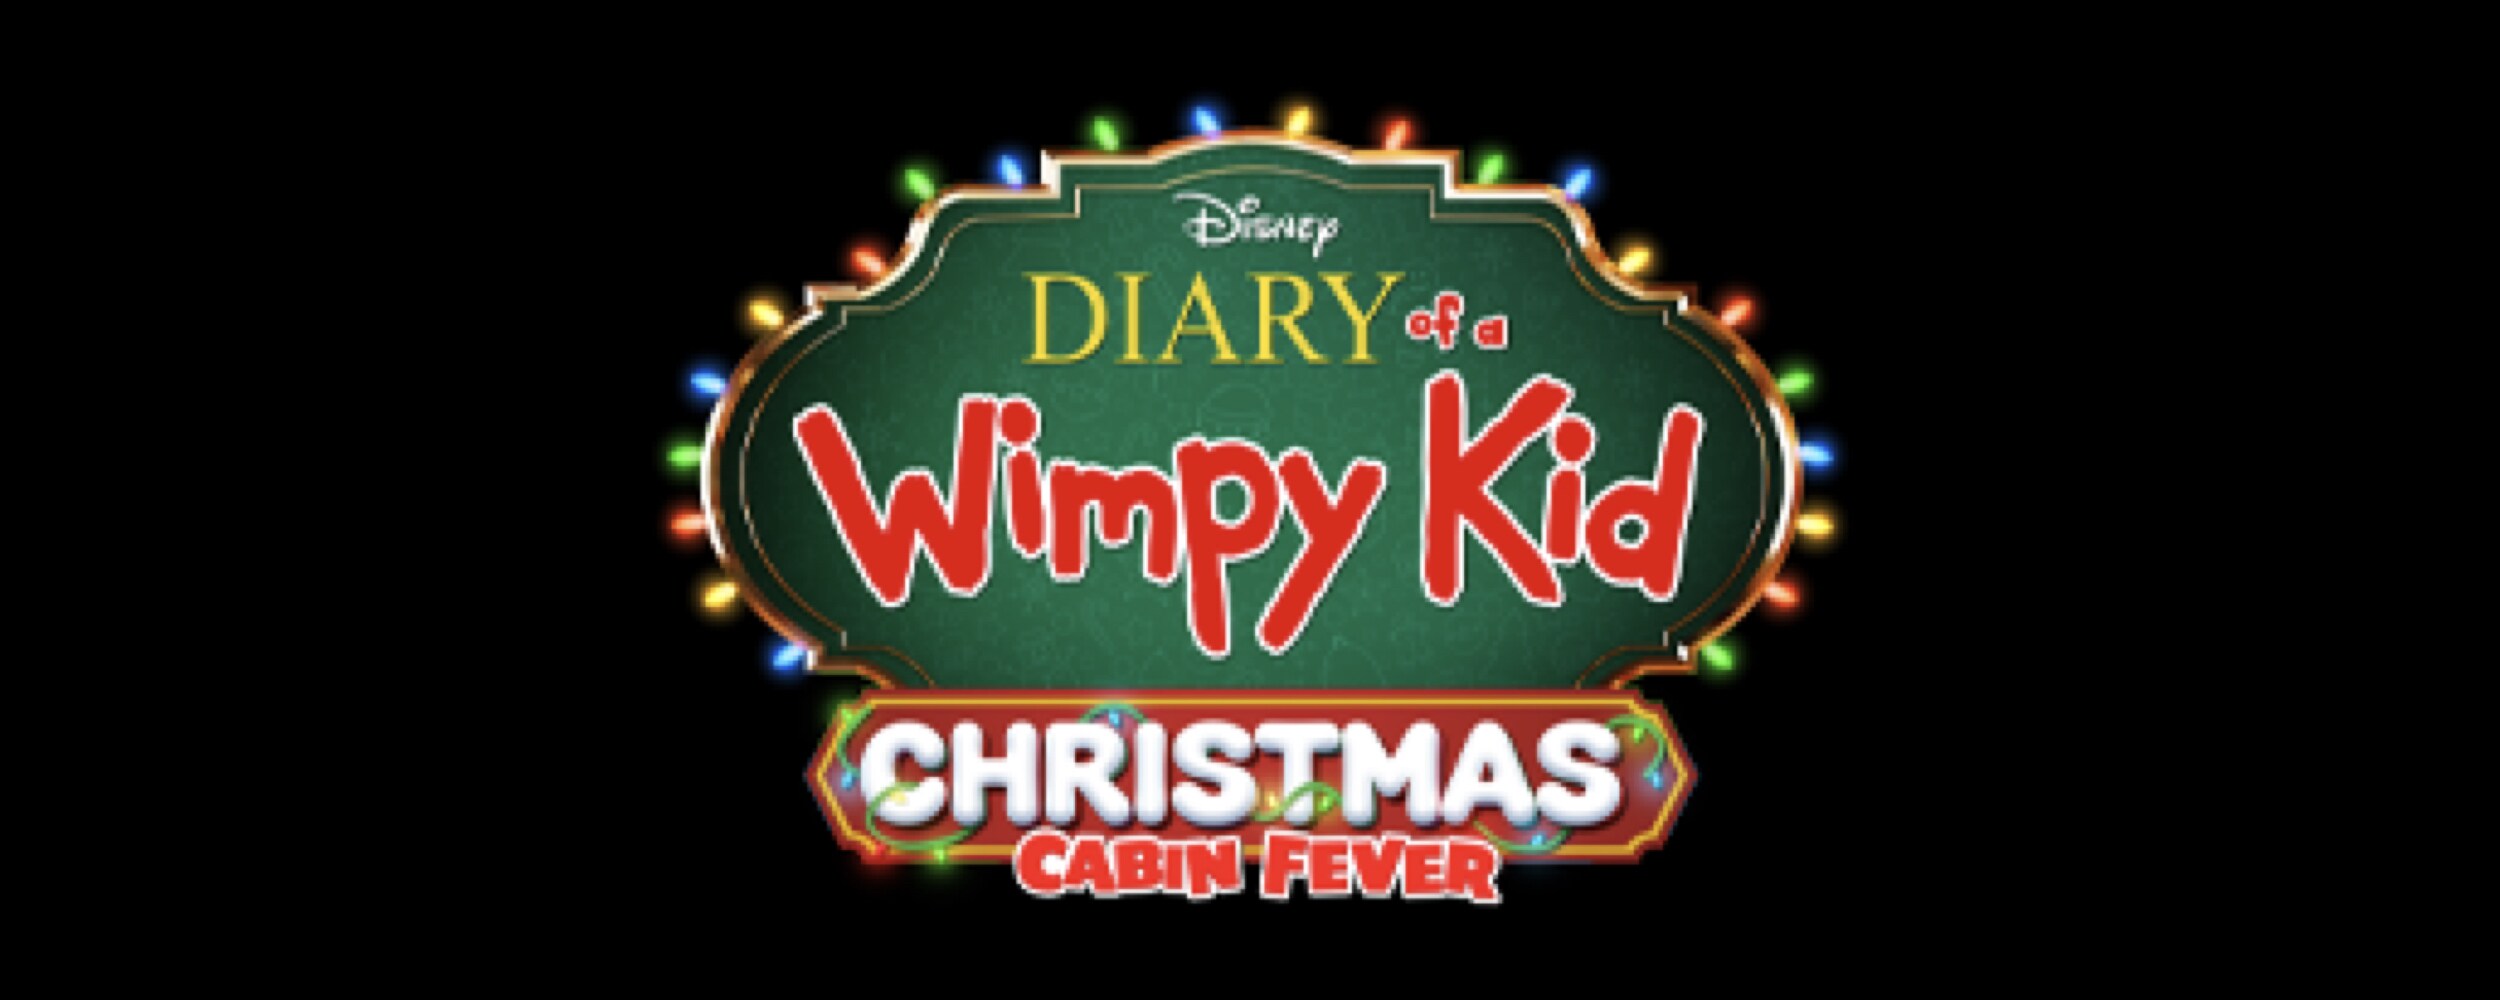 Diary of a Wimpy Kid Christmas: Cabin Fever, wimpy kid